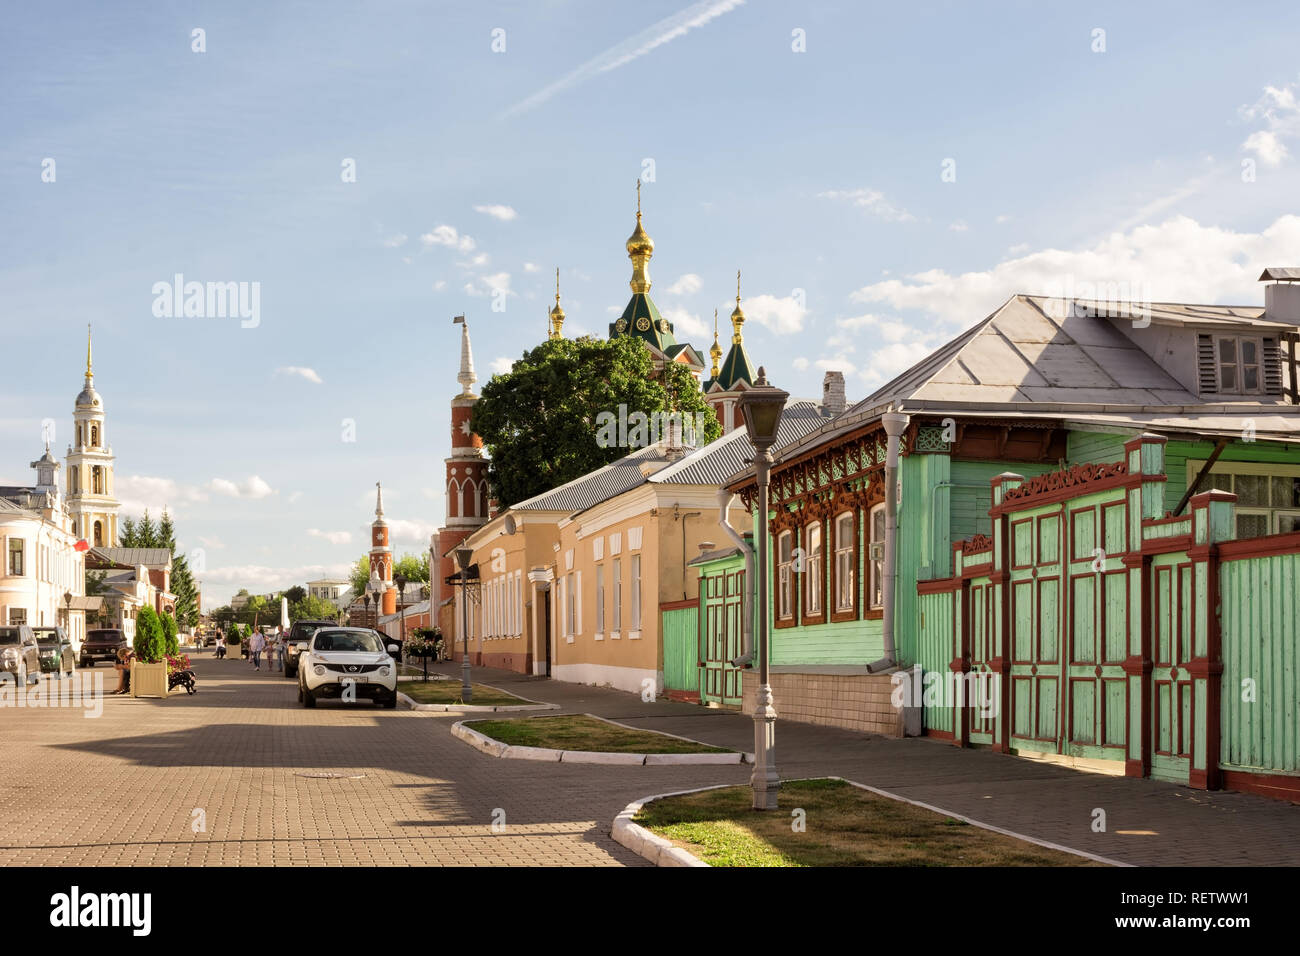 Kolomna, Russia – August 14, 2018: The old town of Kolomna in Russia on a warm sunny day Stock Photo